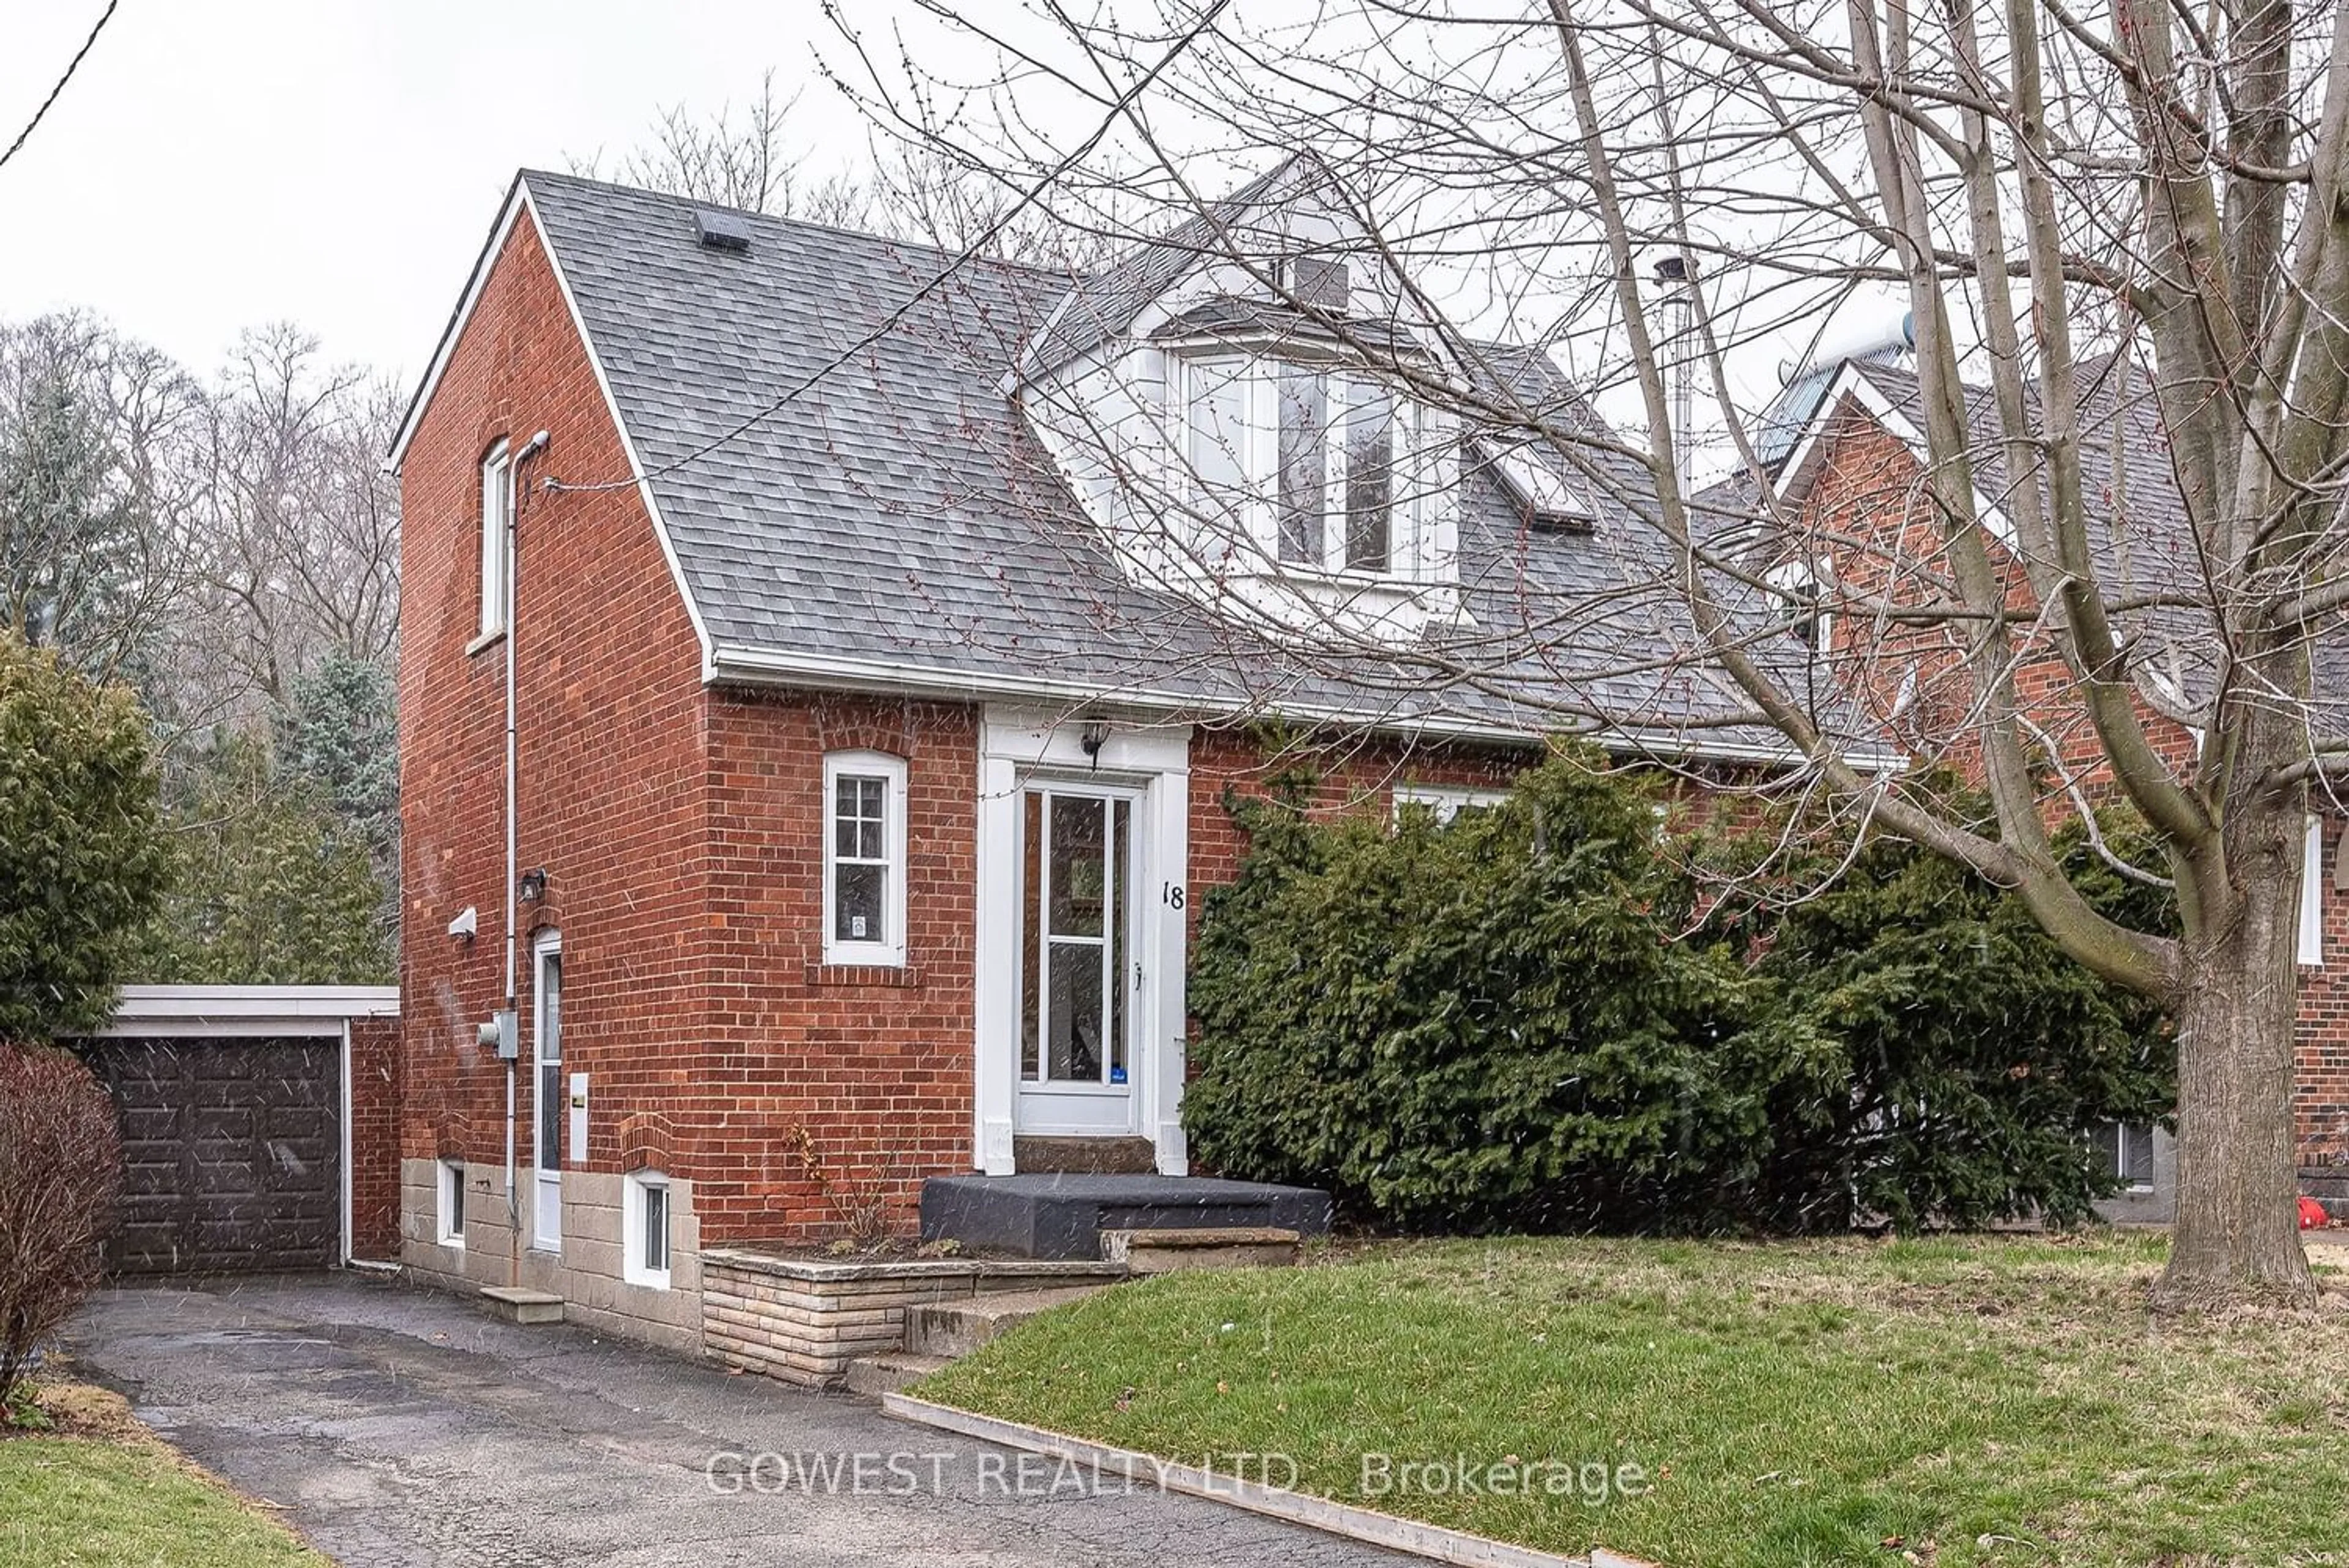 Home with brick exterior material for 18 Worthington Cres, Toronto Ontario M6S 3P6